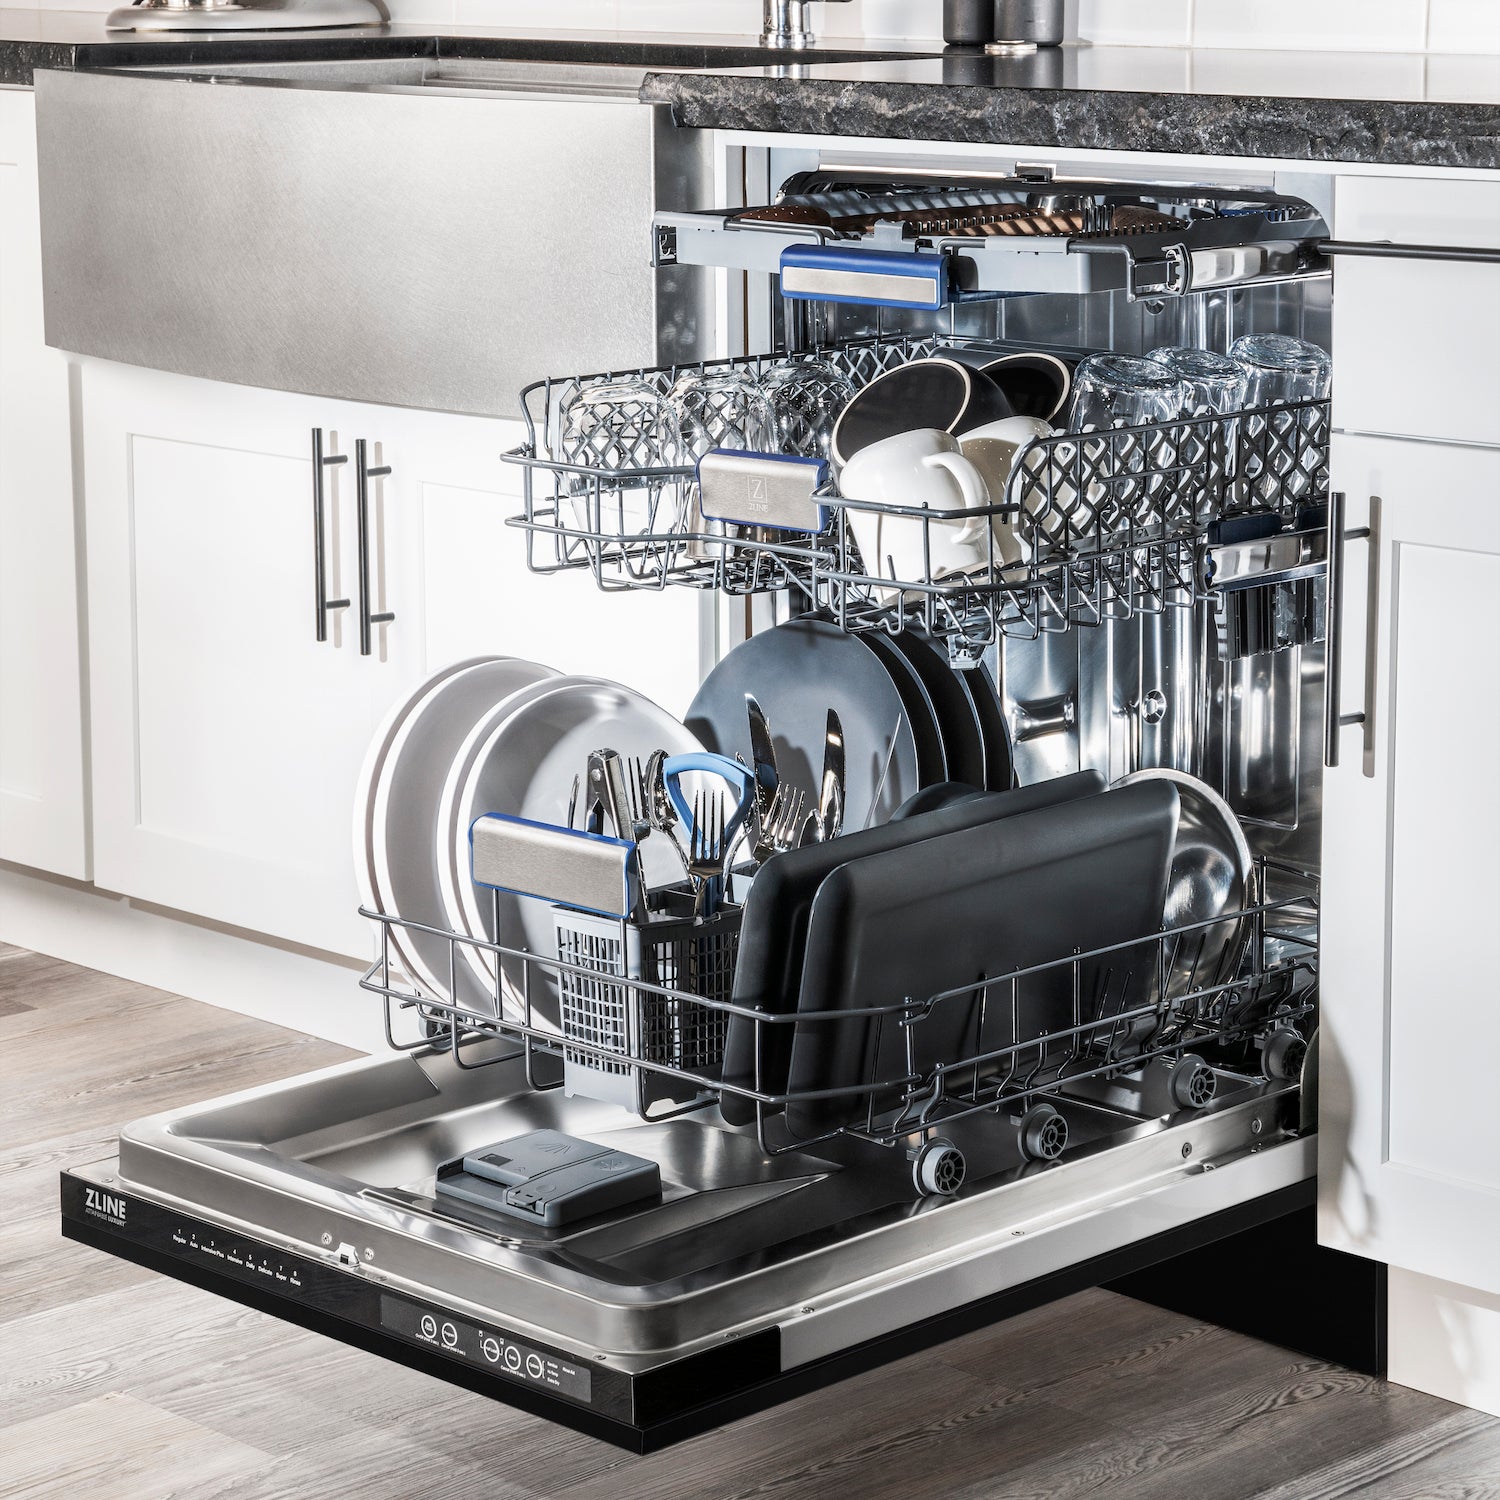 Built-in ZLINE dishwasher fully loaded with dishes on all three racks.